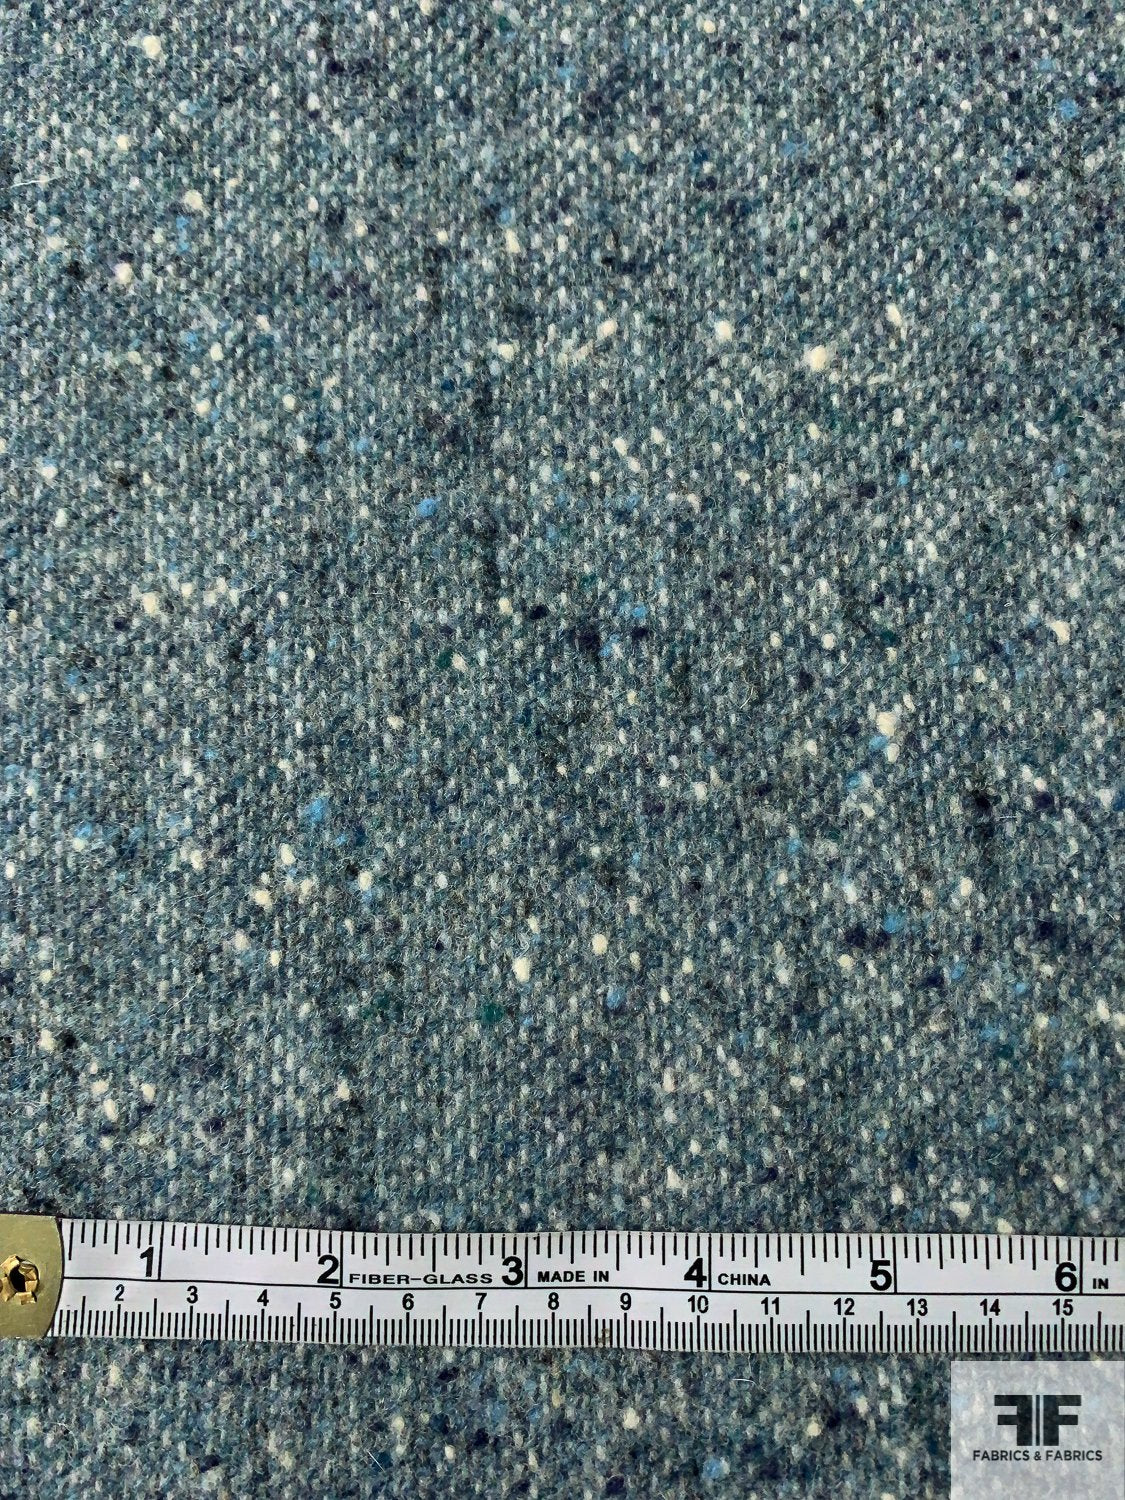 Italian Speckled Jacket Weight Wool Blend Tweed Coating - Stucco Blue Spruce / Off-White